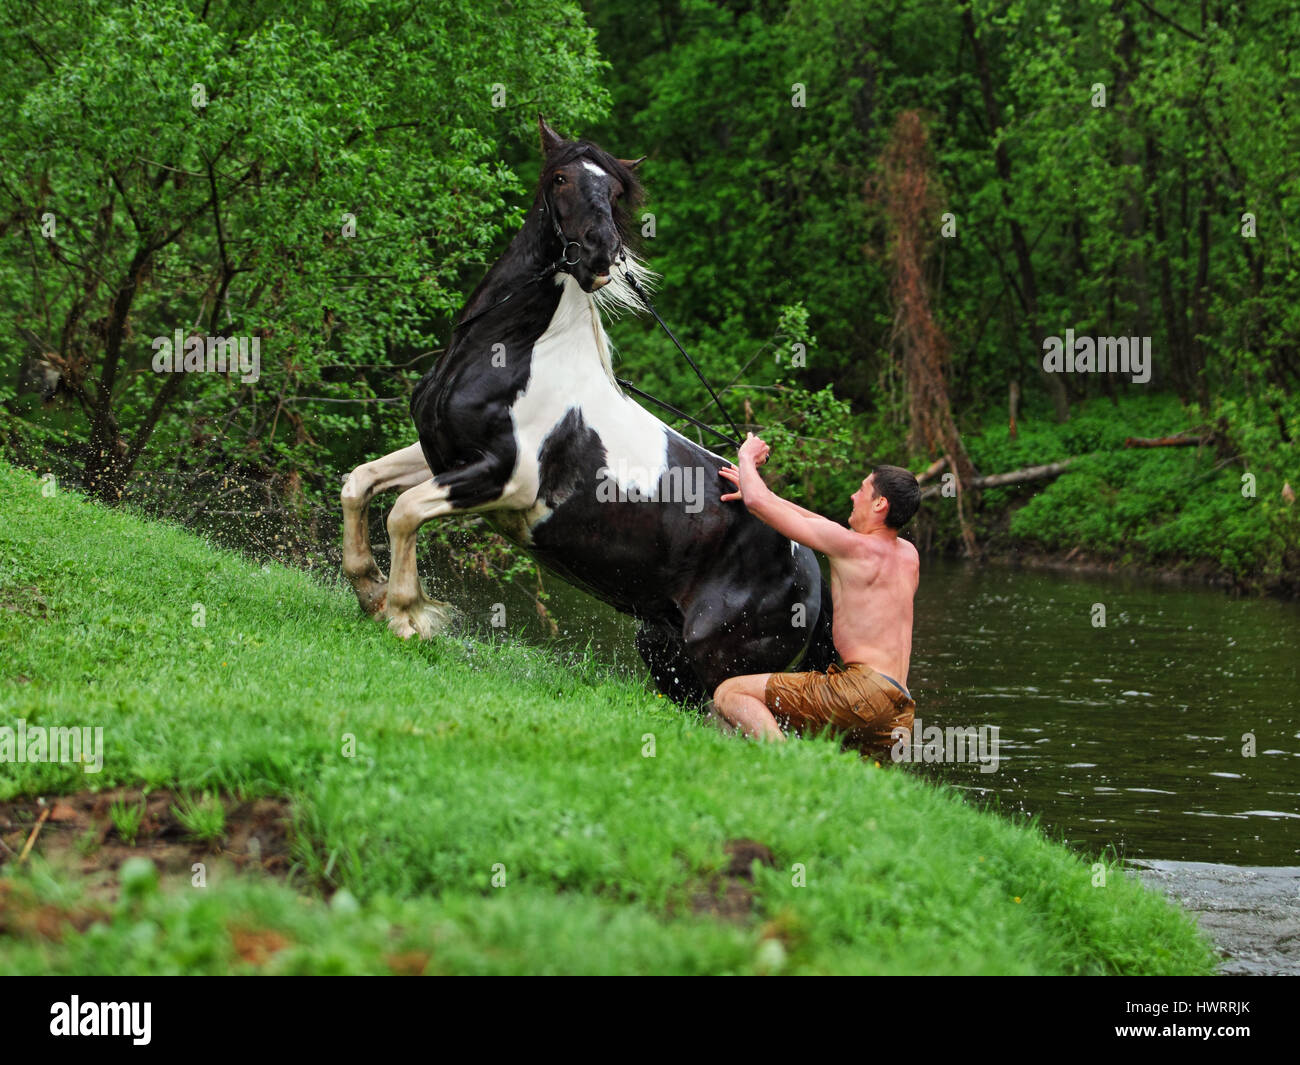 The boy catches a runaway horse in the river Stock Photo